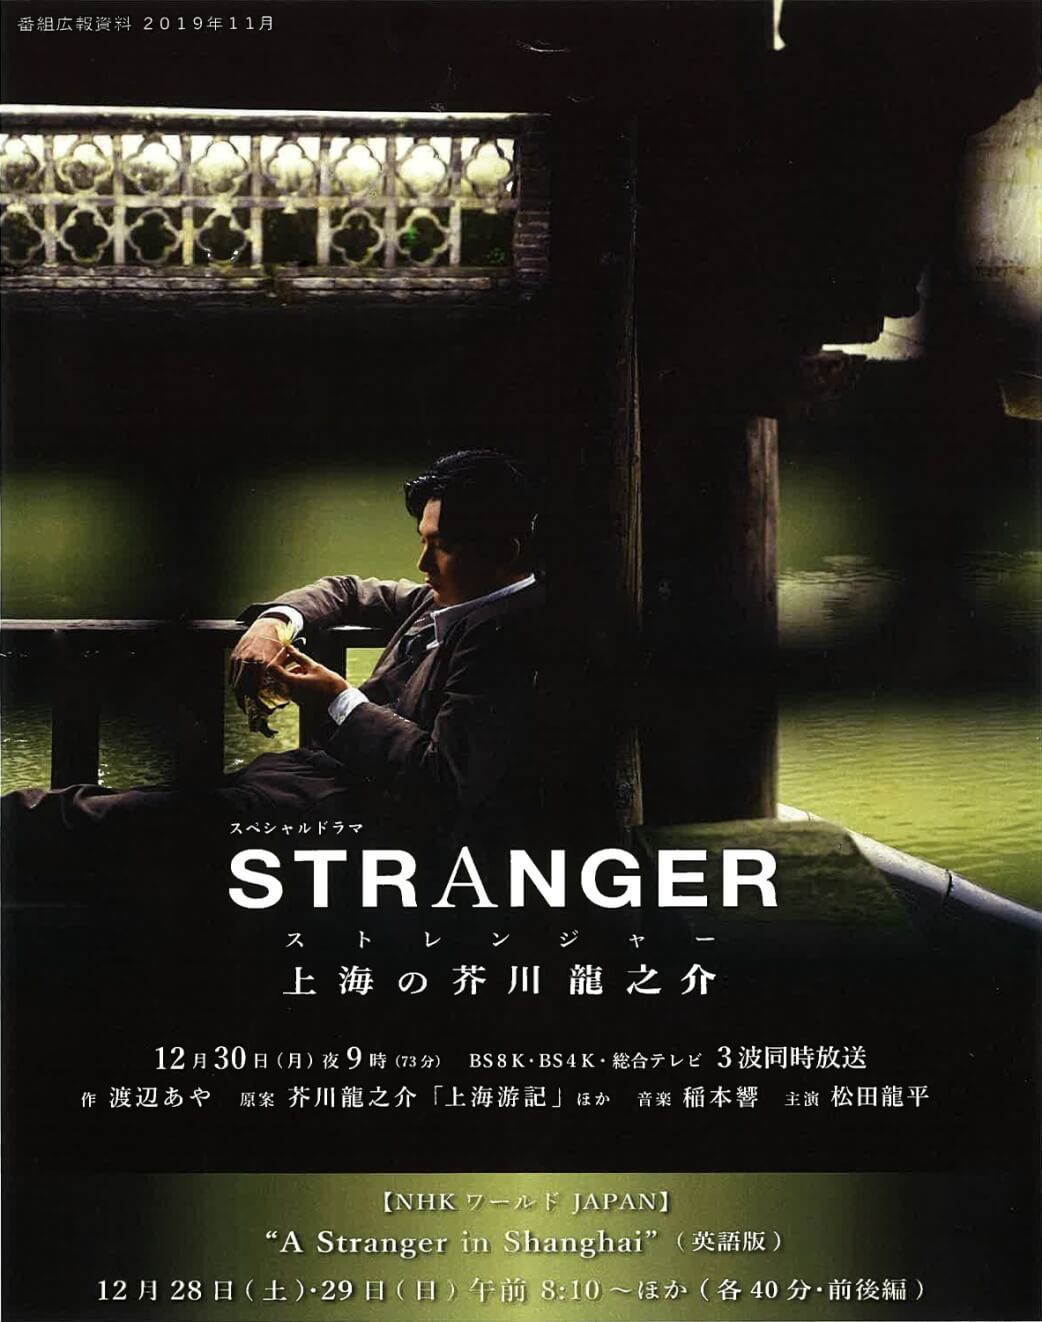 A Stranger in Shanghai airs in English in two parts on NHK World Japan. Tune in at 8:10 in the morning on Saturday and Sunday, December 28 and 29, 2019. The English and Chinese versions of the program will be streamed online beginning in January 2020. 